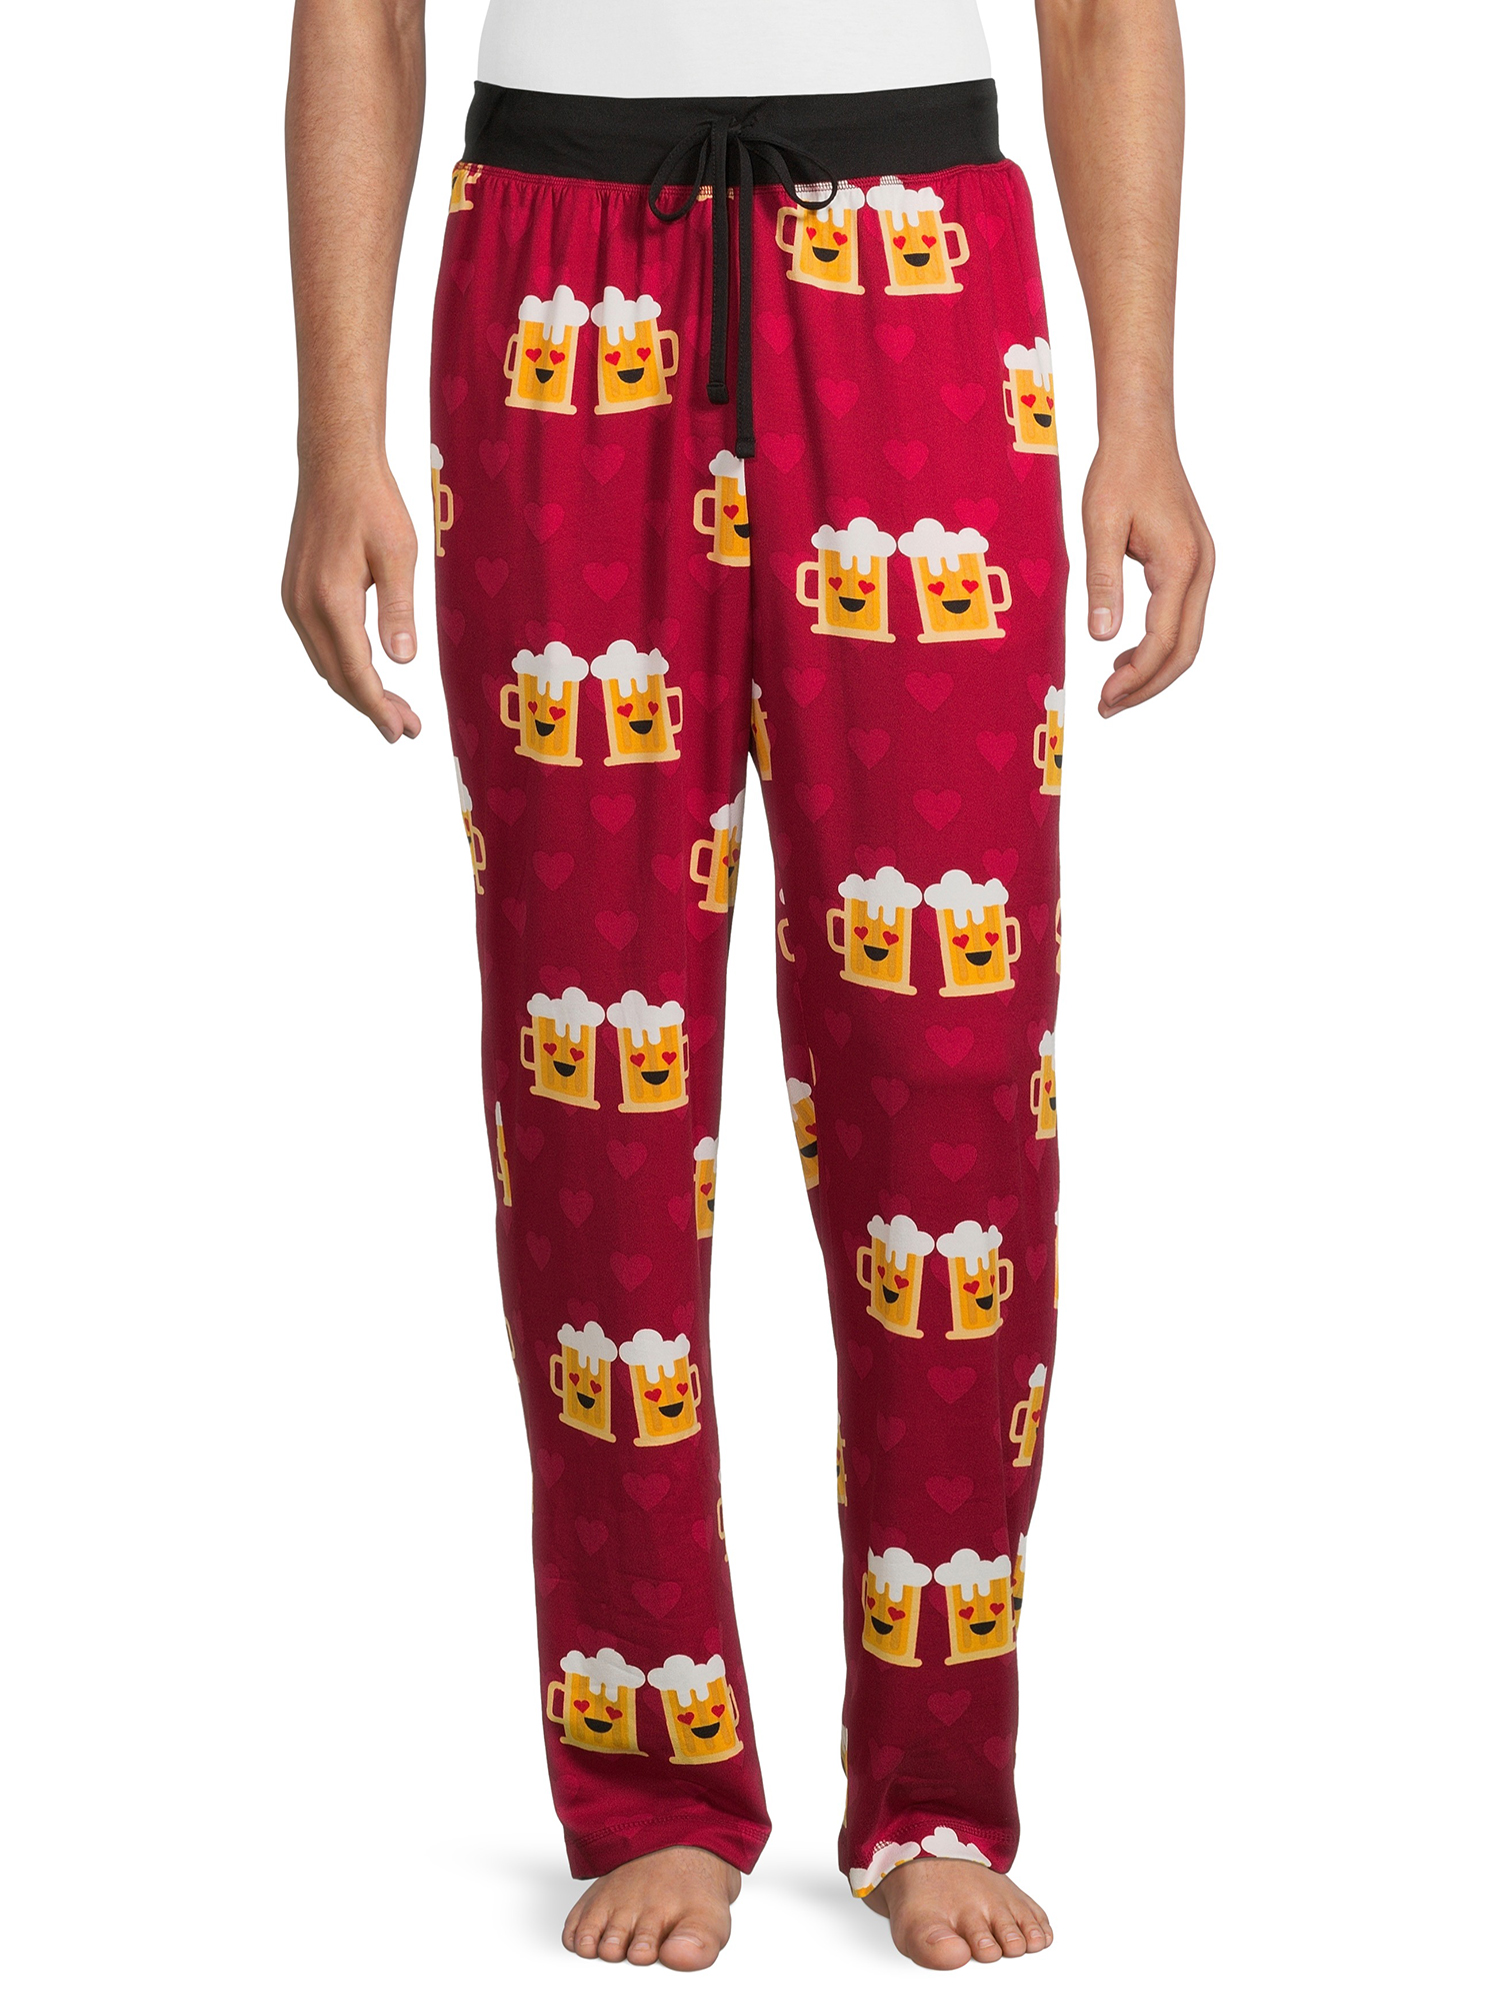 Valentine's Day Men's and Big Men's Sleep Pants, 2-Pack, Heather Red and Match Made Beer Designs - image 2 of 5